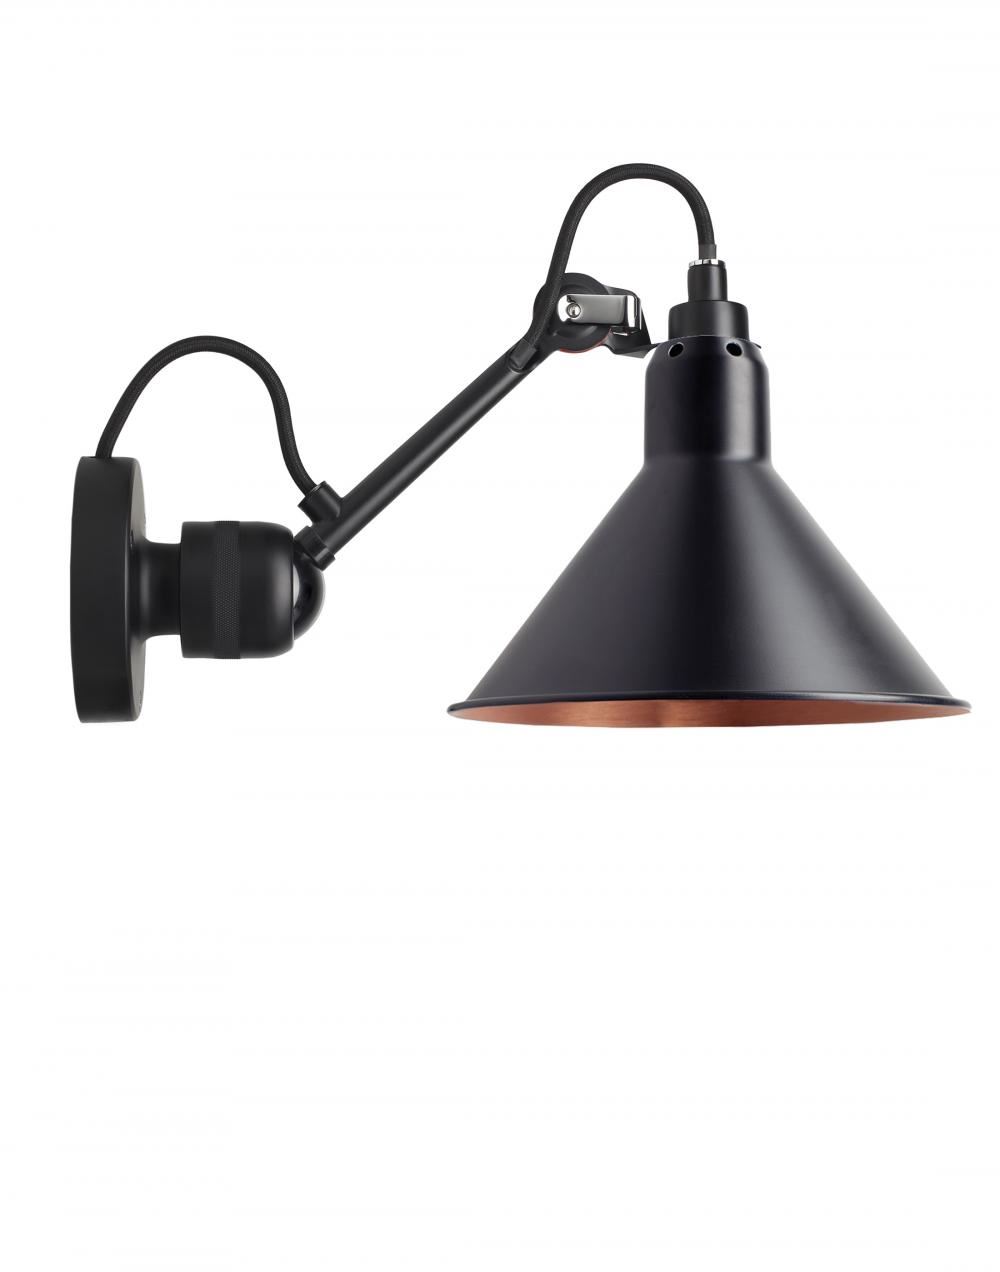 Lampe Gras 304 Small Wall Light Black Arm Black Shade With Copper Interior Conic Hardwired